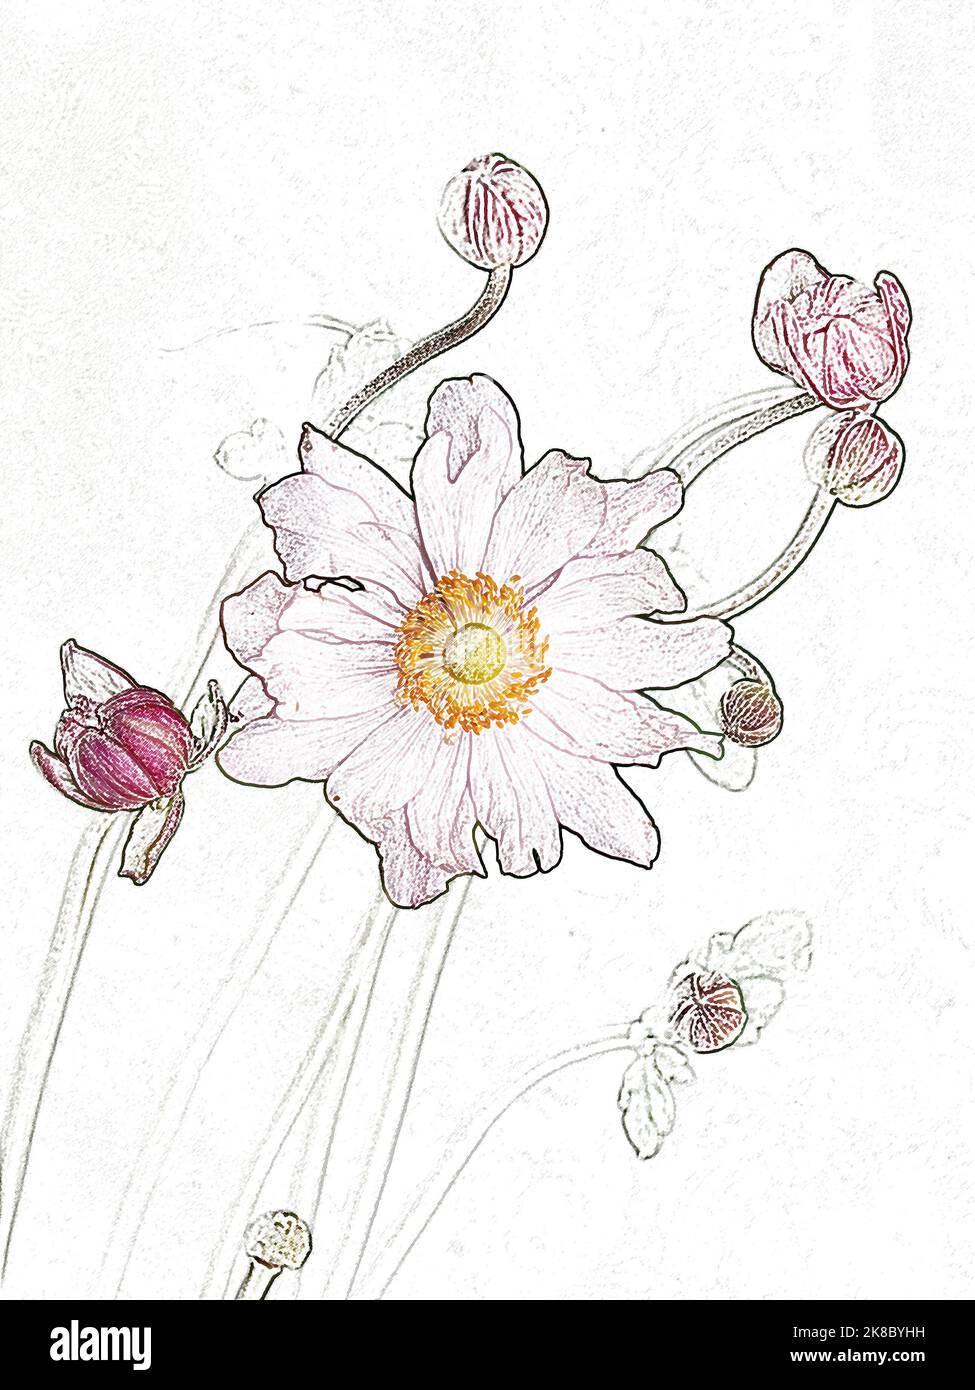 Close up of the computer generated flower head drawing of the herbaceous perennial garden plant Japanese Anemone seen in autumn. Stock Photo